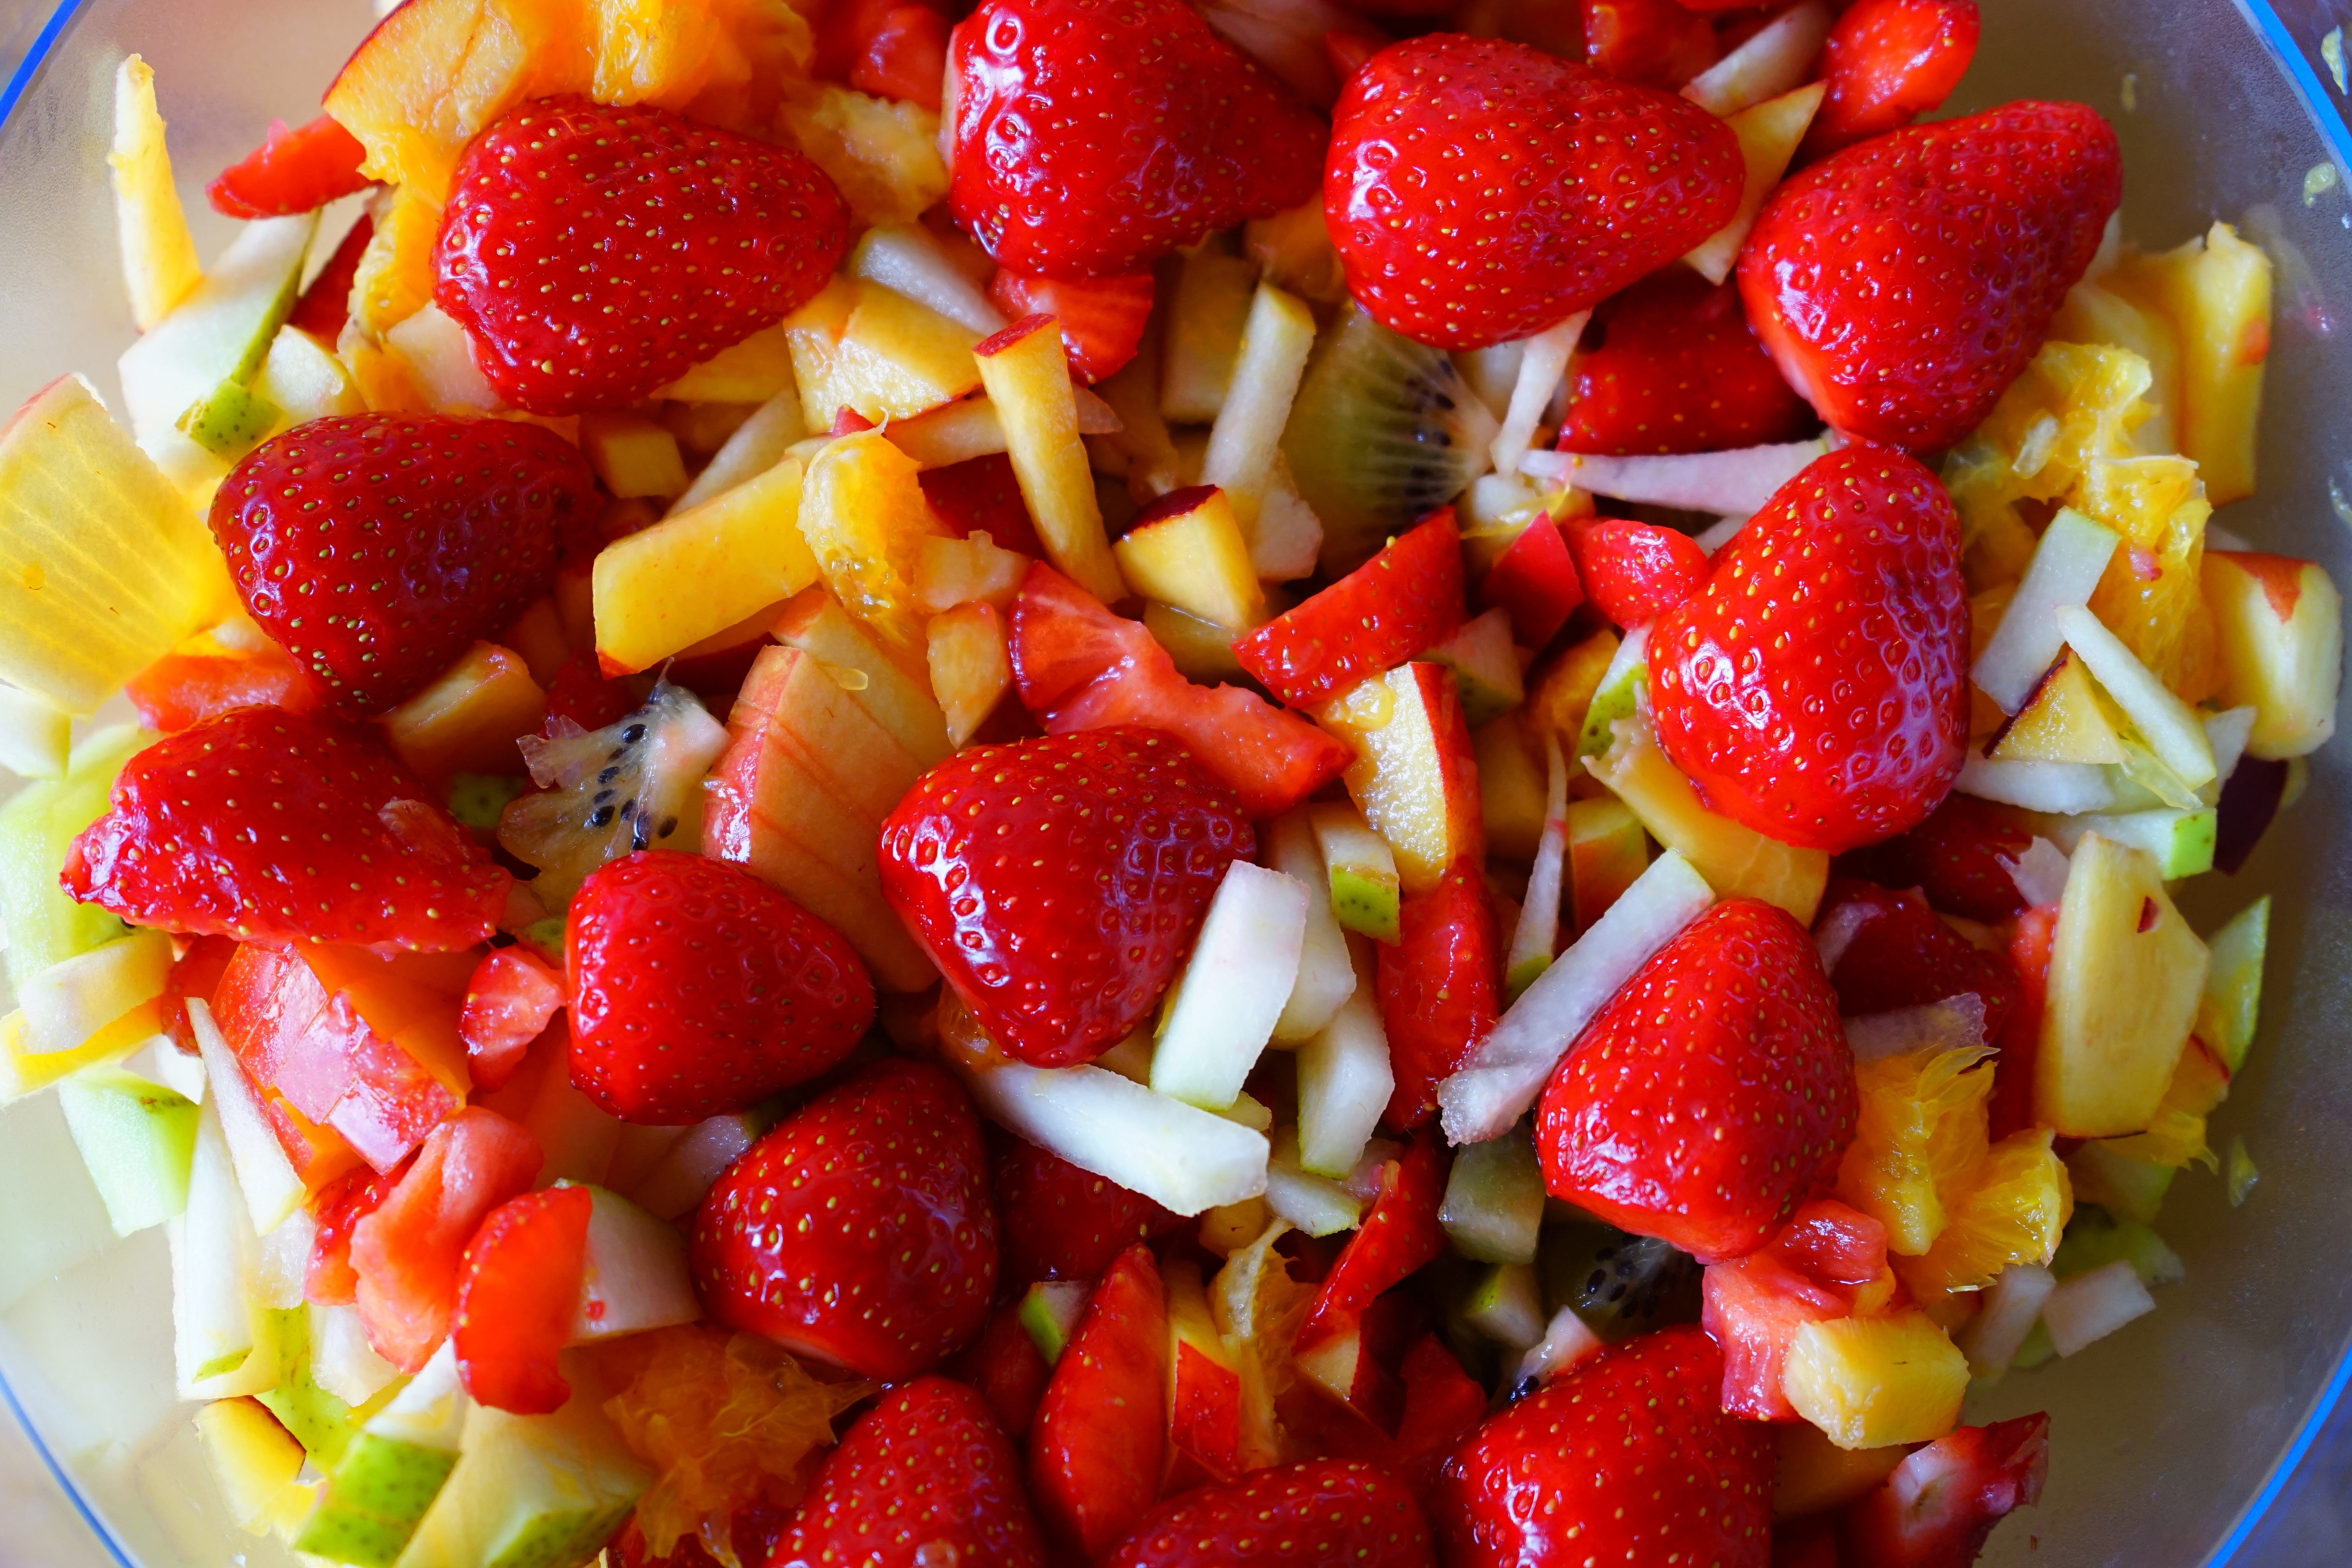 Chopped fruit and berry salad